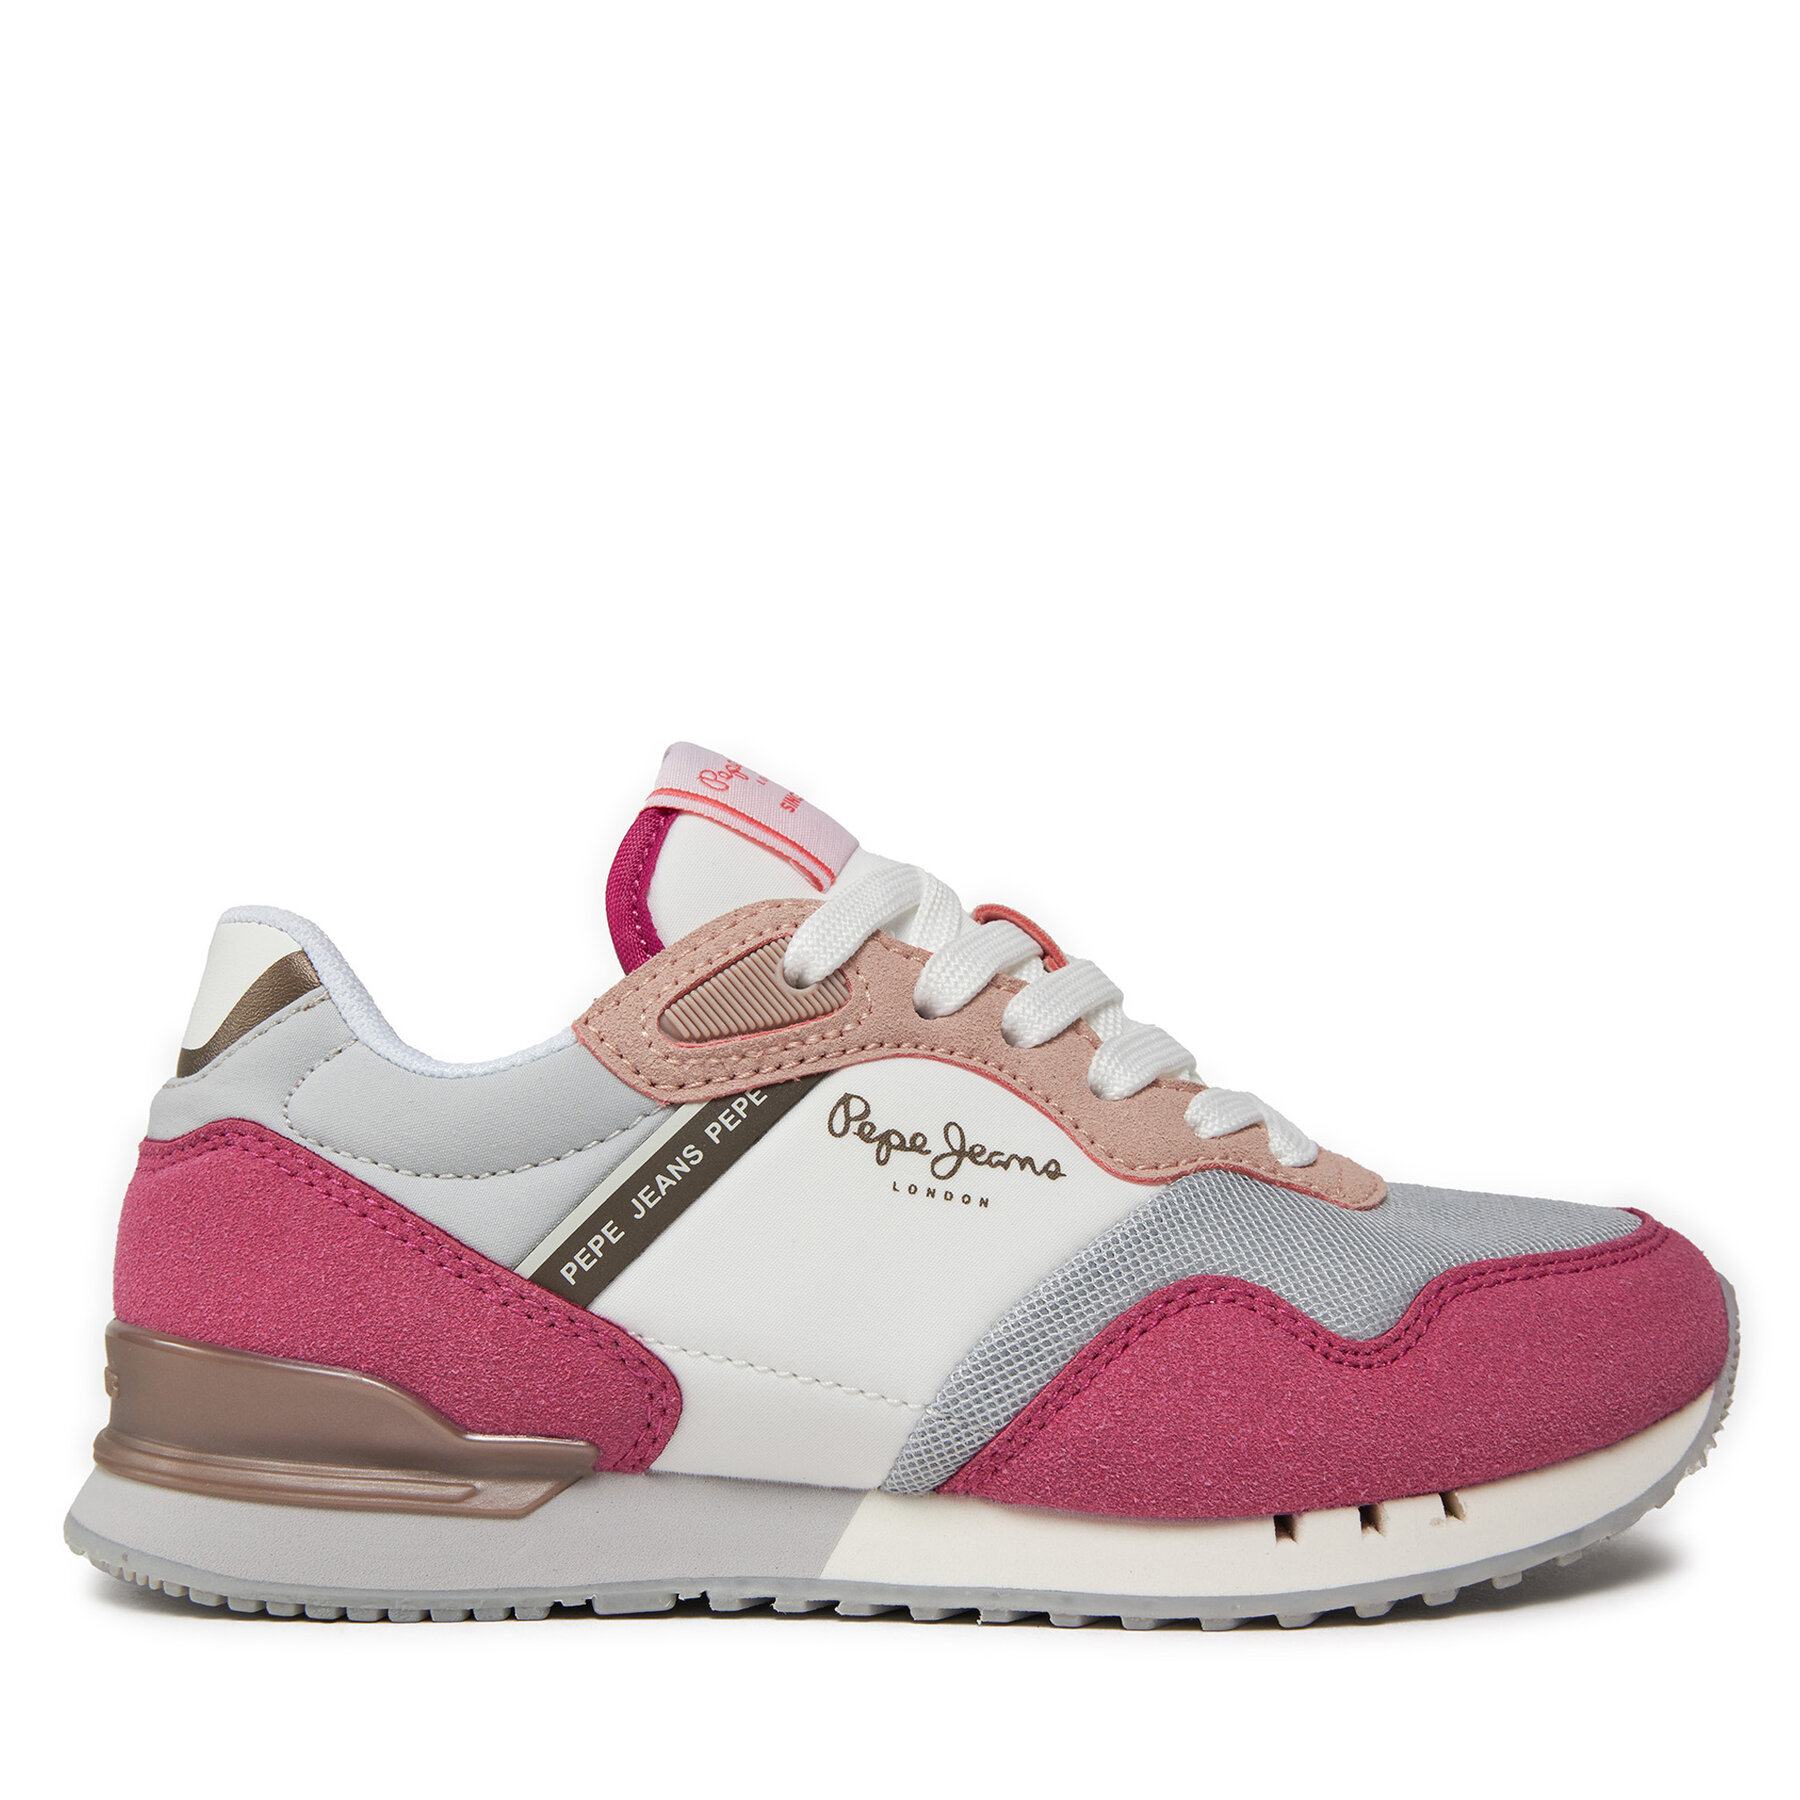 Sneakers Pepe Jeans London Urban G PGS40002 Sundae Pink 339 von Pepe Jeans